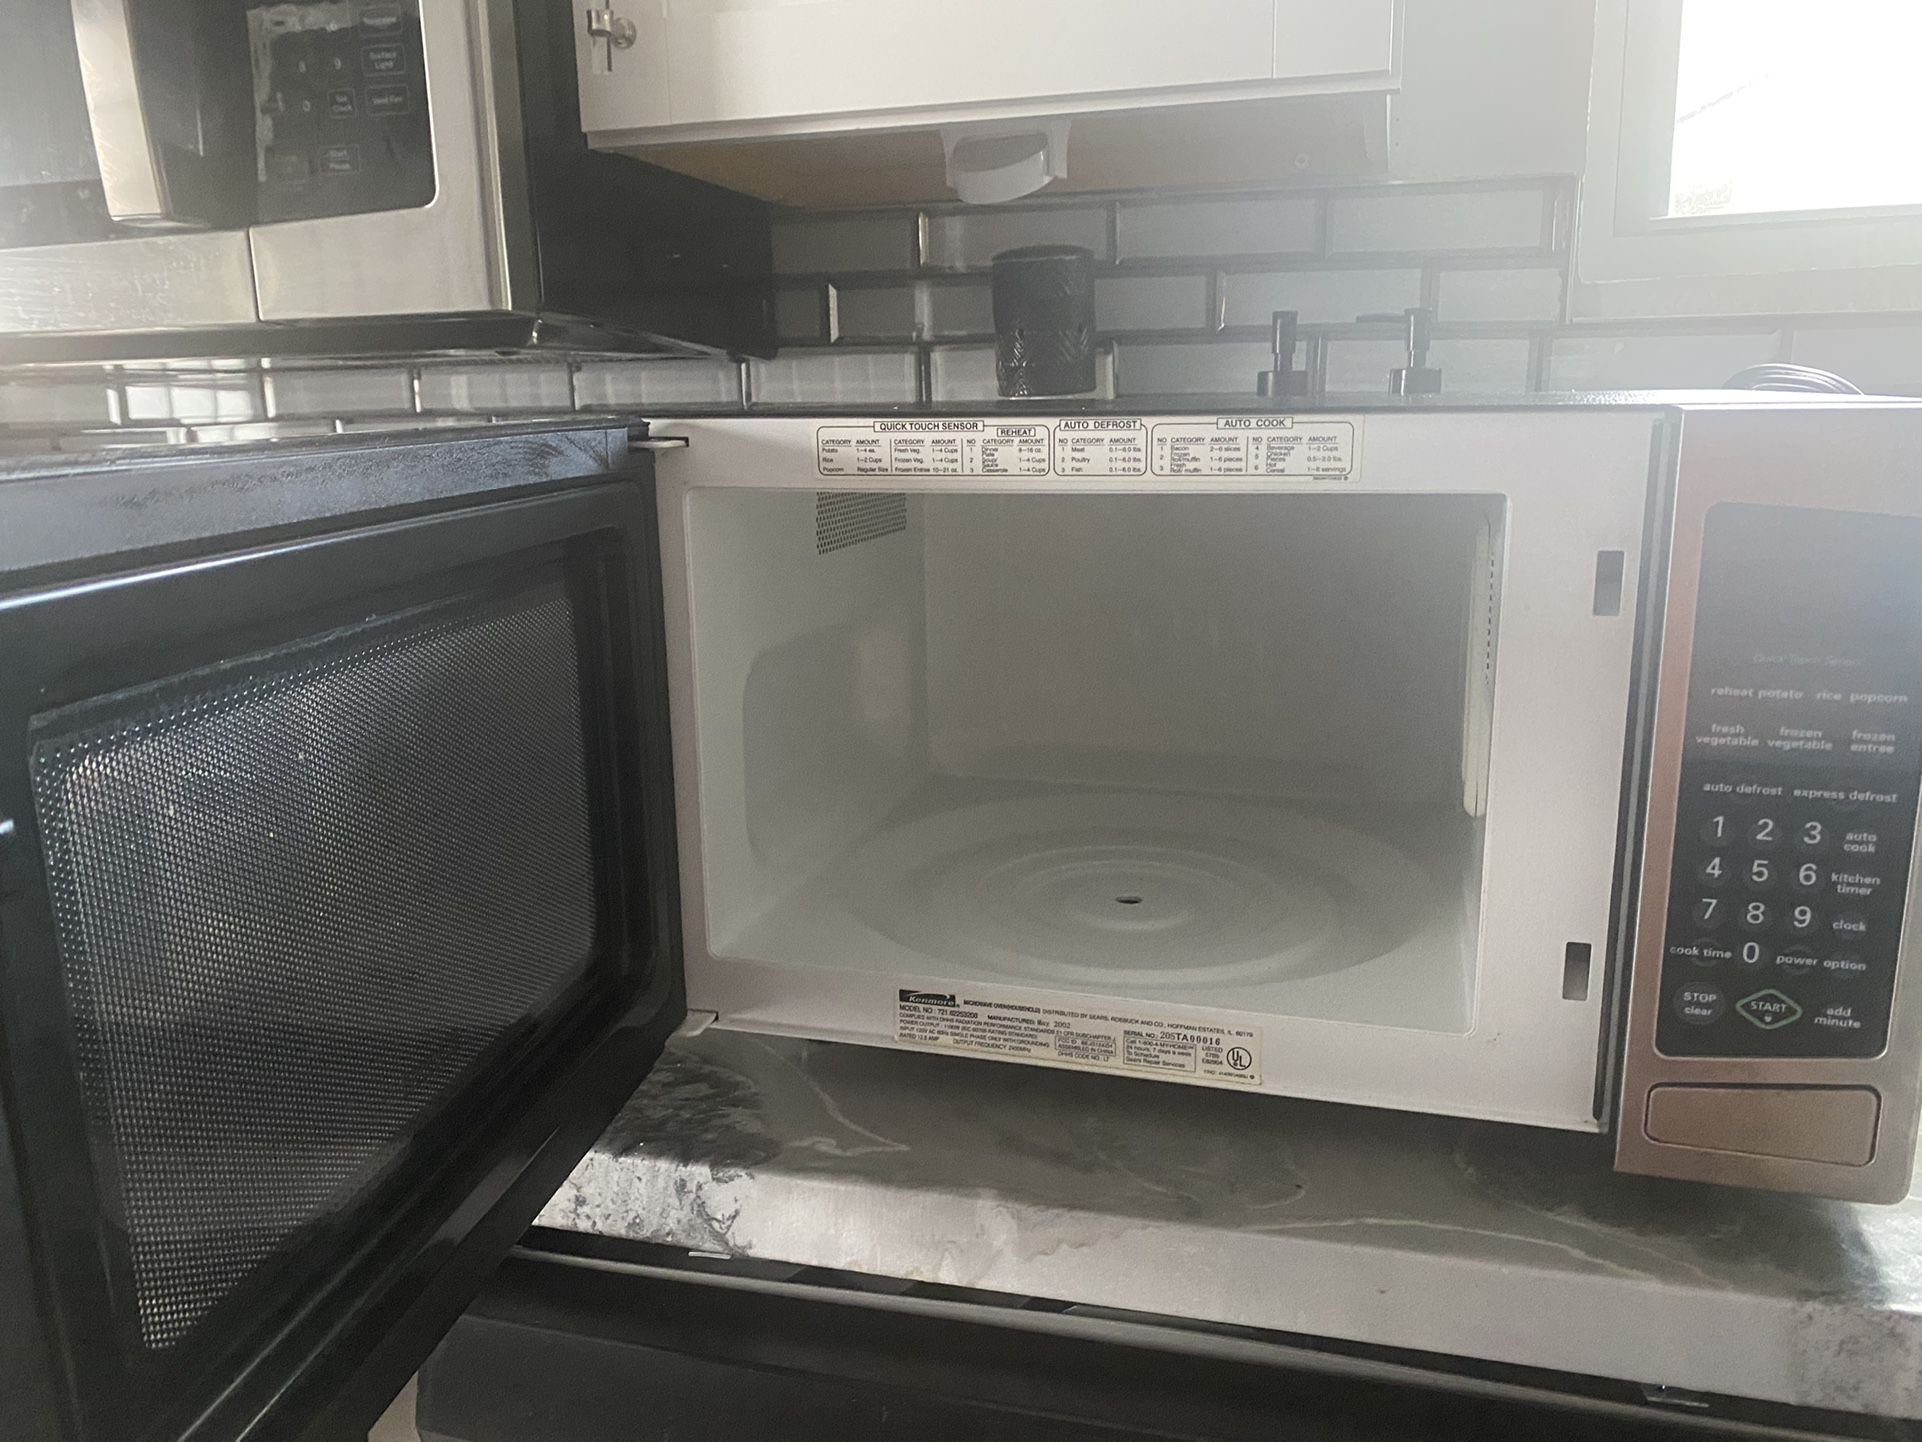 Kenmore Microwave Oven Model 721.66222500 - Oahu Auctions